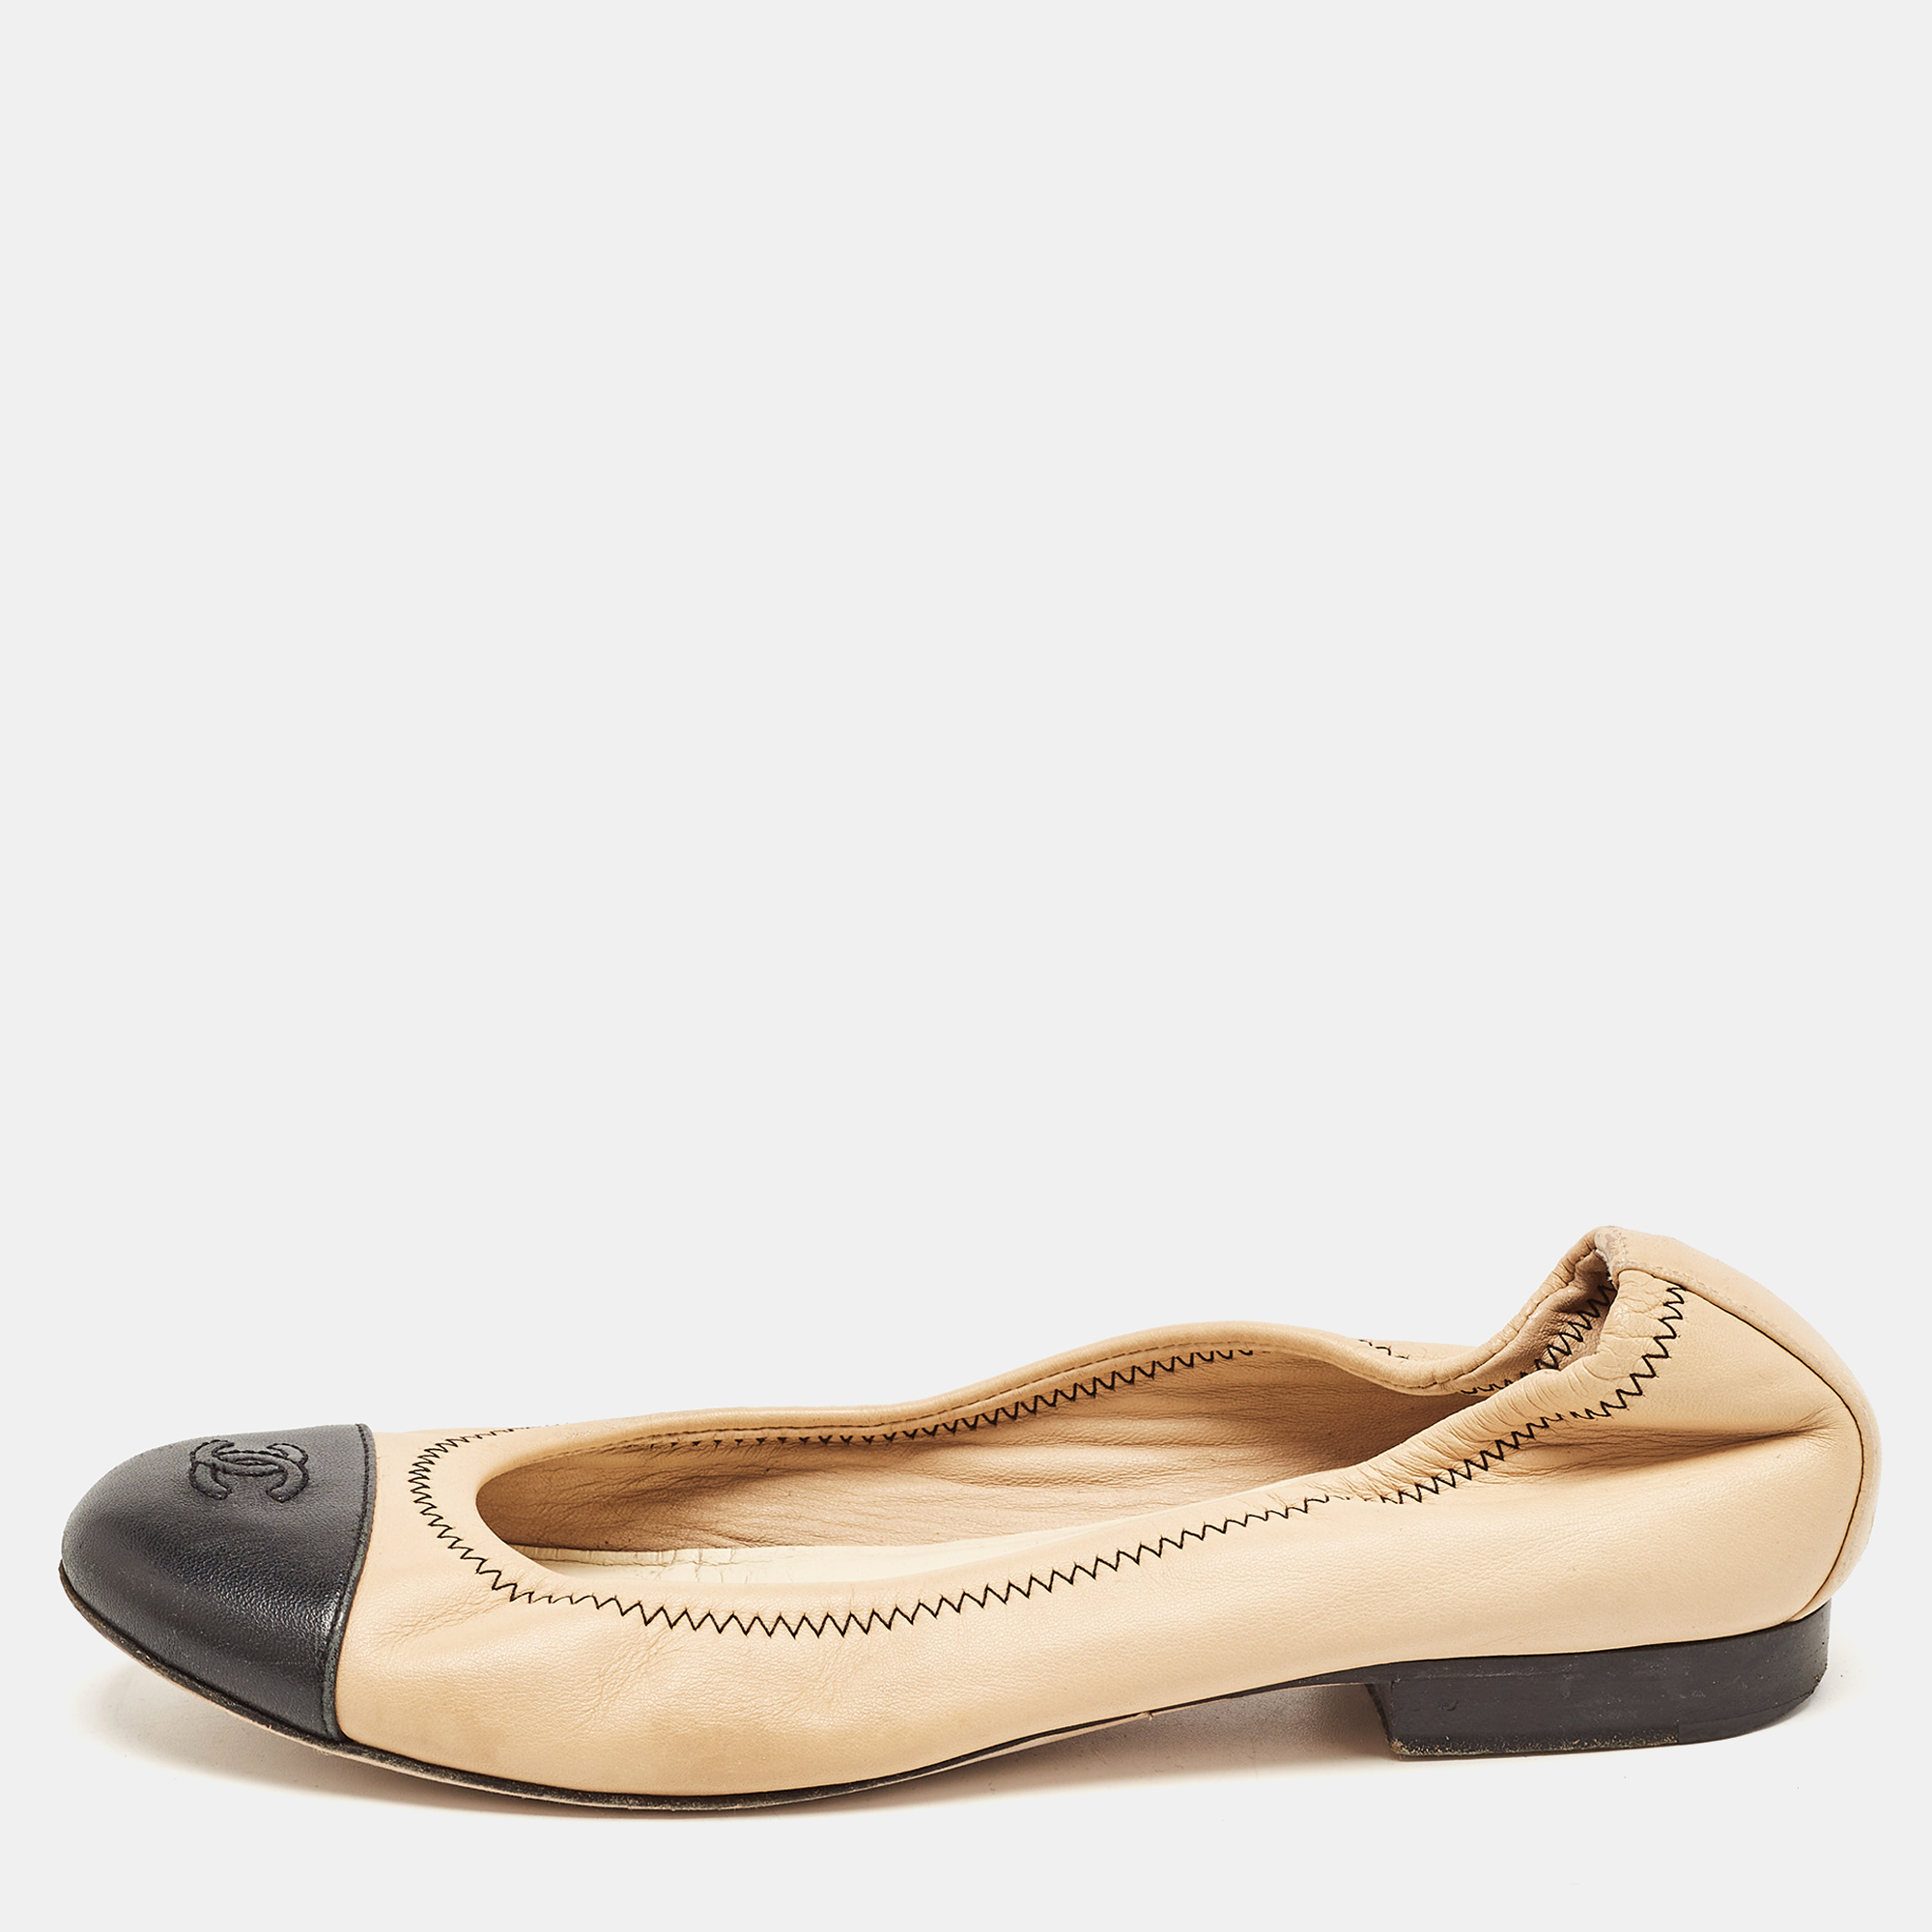 Pre-owned Chanel Beige/black Leather Cc Ballet Flats Size 36.5